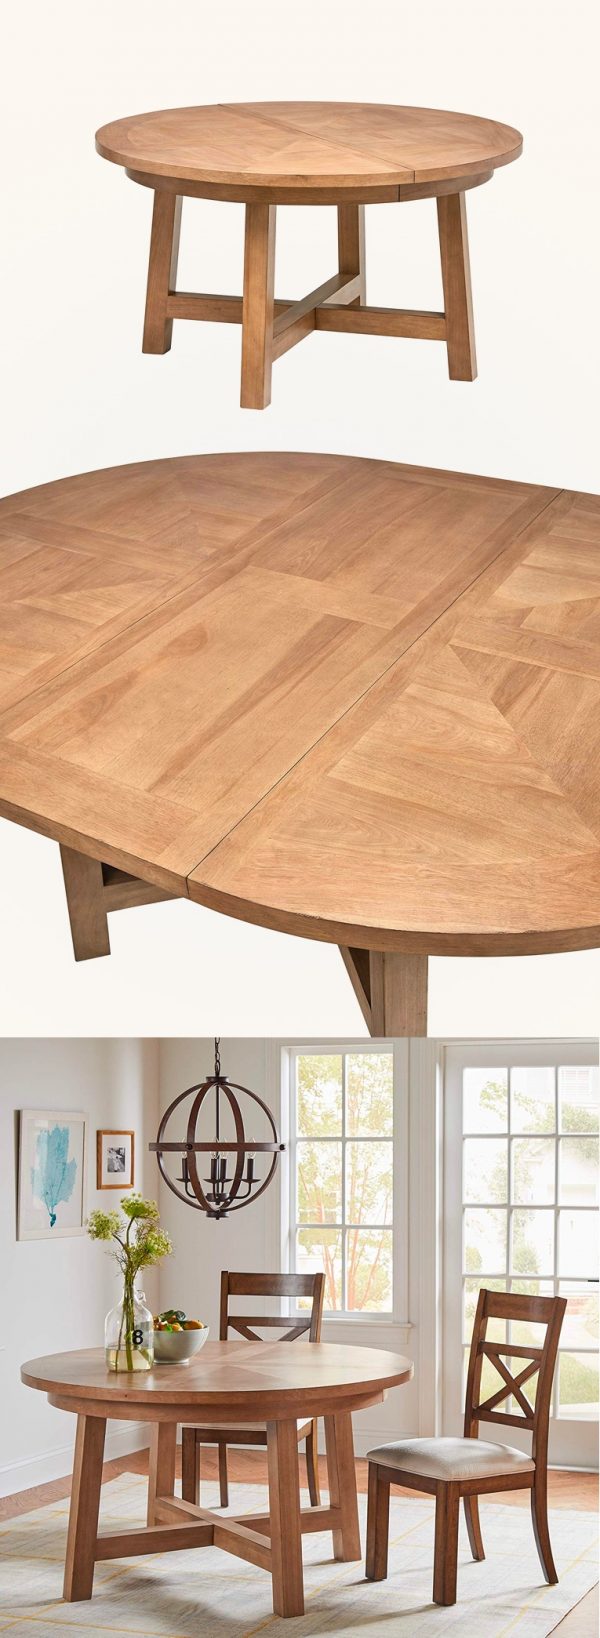 51 Round Dining Tables That Save On Space But Never Skimp On Style,Small Cottage Designs India